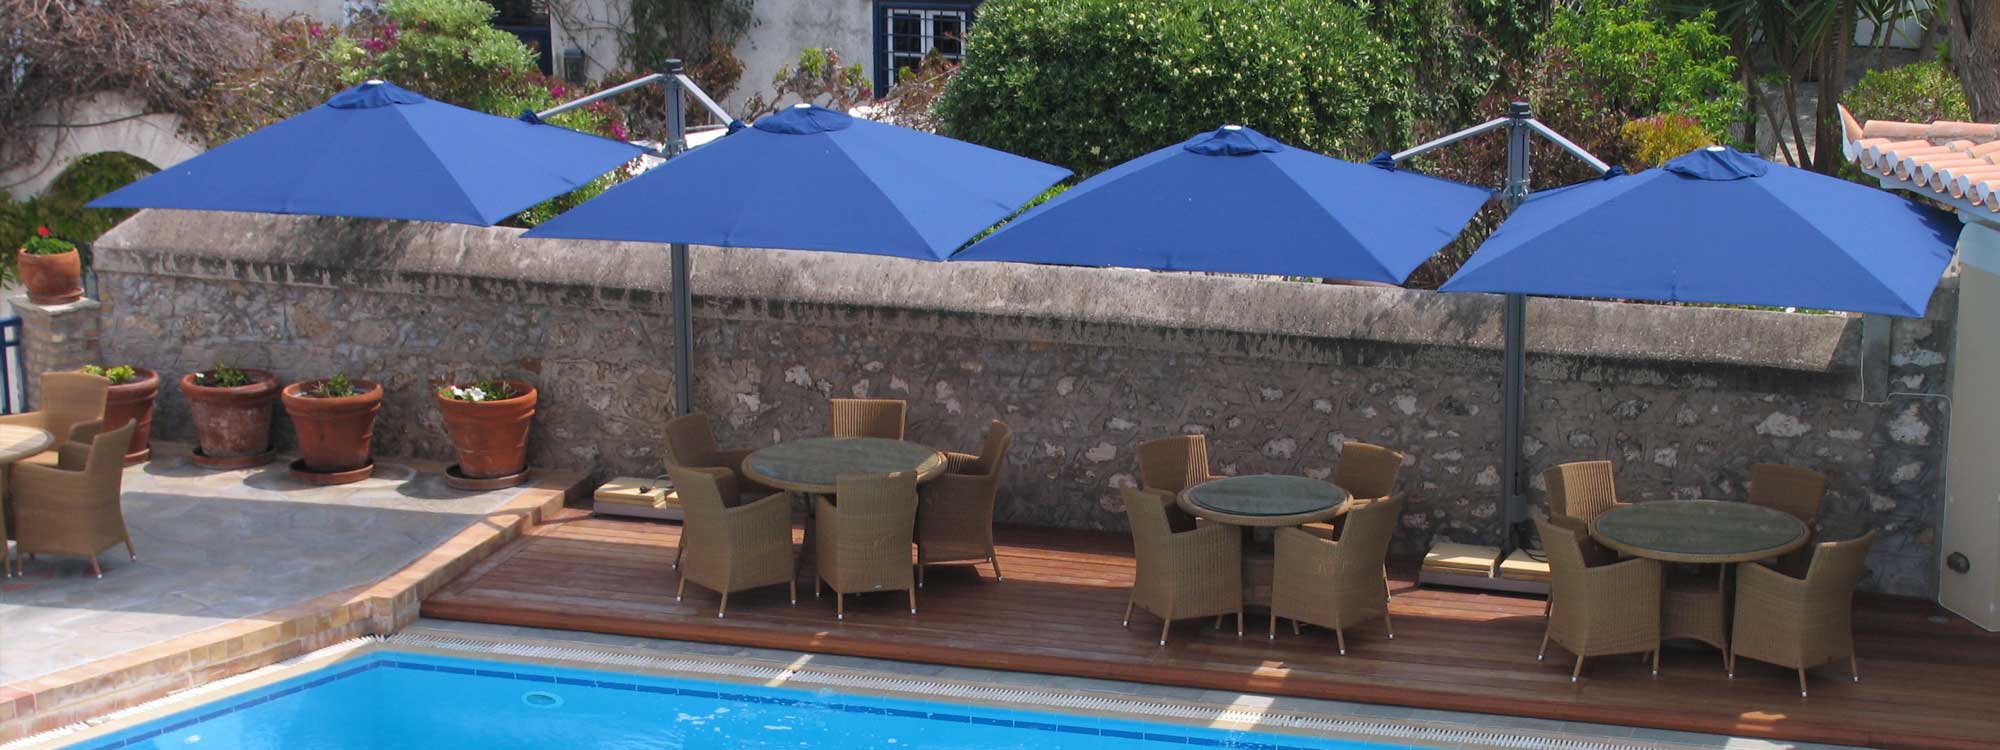 Image of 2 P6 twin canopy parasols with blue fabric and grey powder coated aluminium masts by Prostor